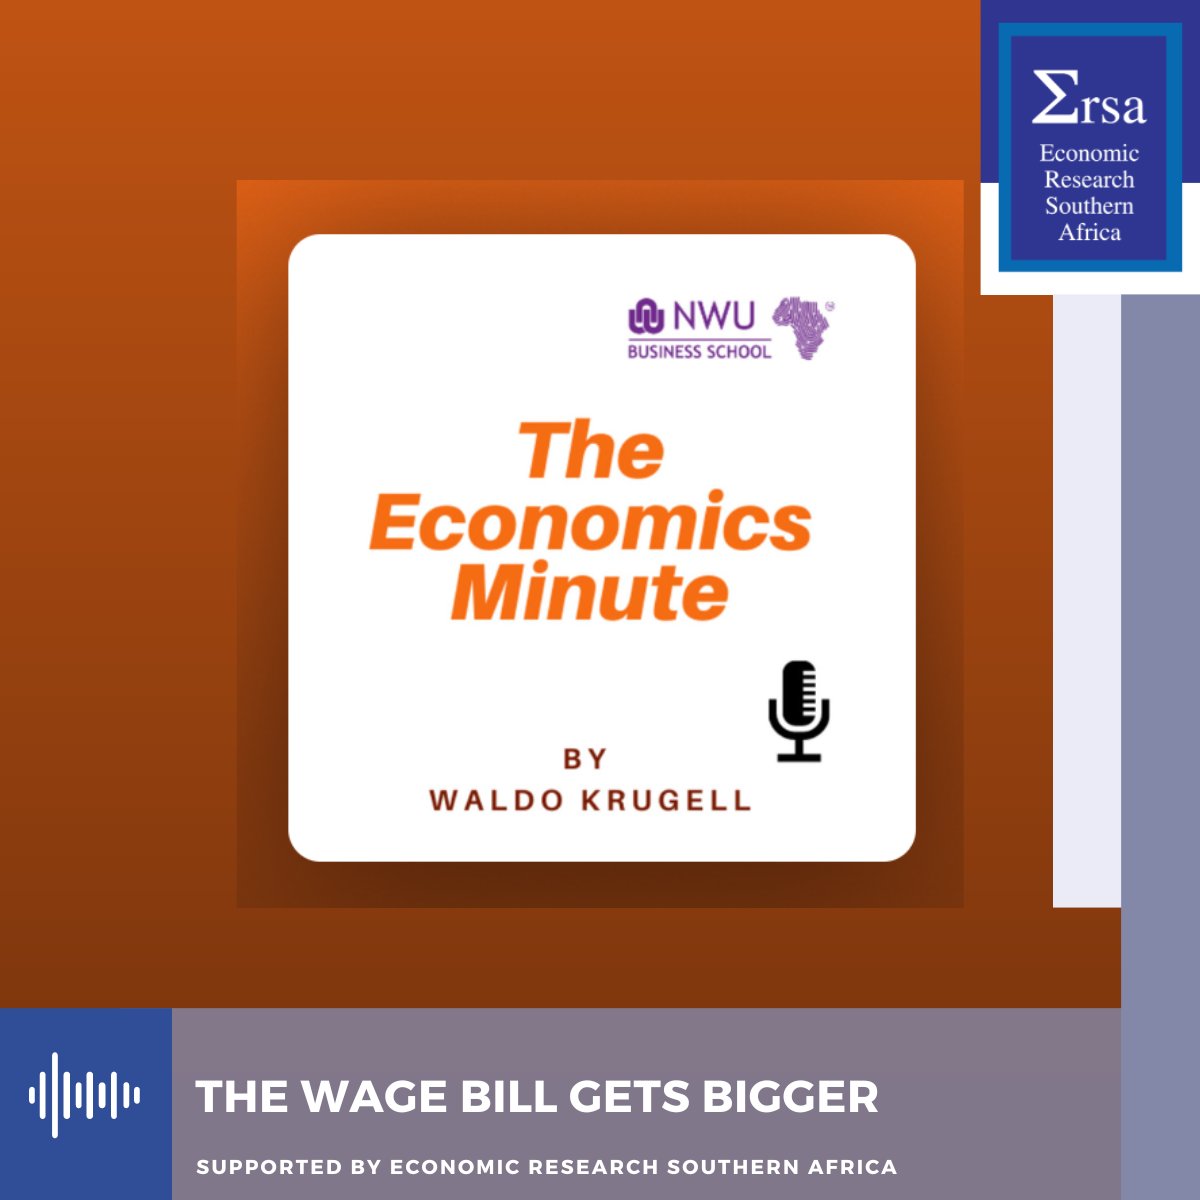 As we continue to encourage economic discussions, we support ‘The Economics Minute’ by @WaldoKrugell. How large is SA's civil service compared to other countries? And relative to inflation and productivity, how has it grown over the past decade? Listen: open.spotify.com/episode/3zi0Sv…